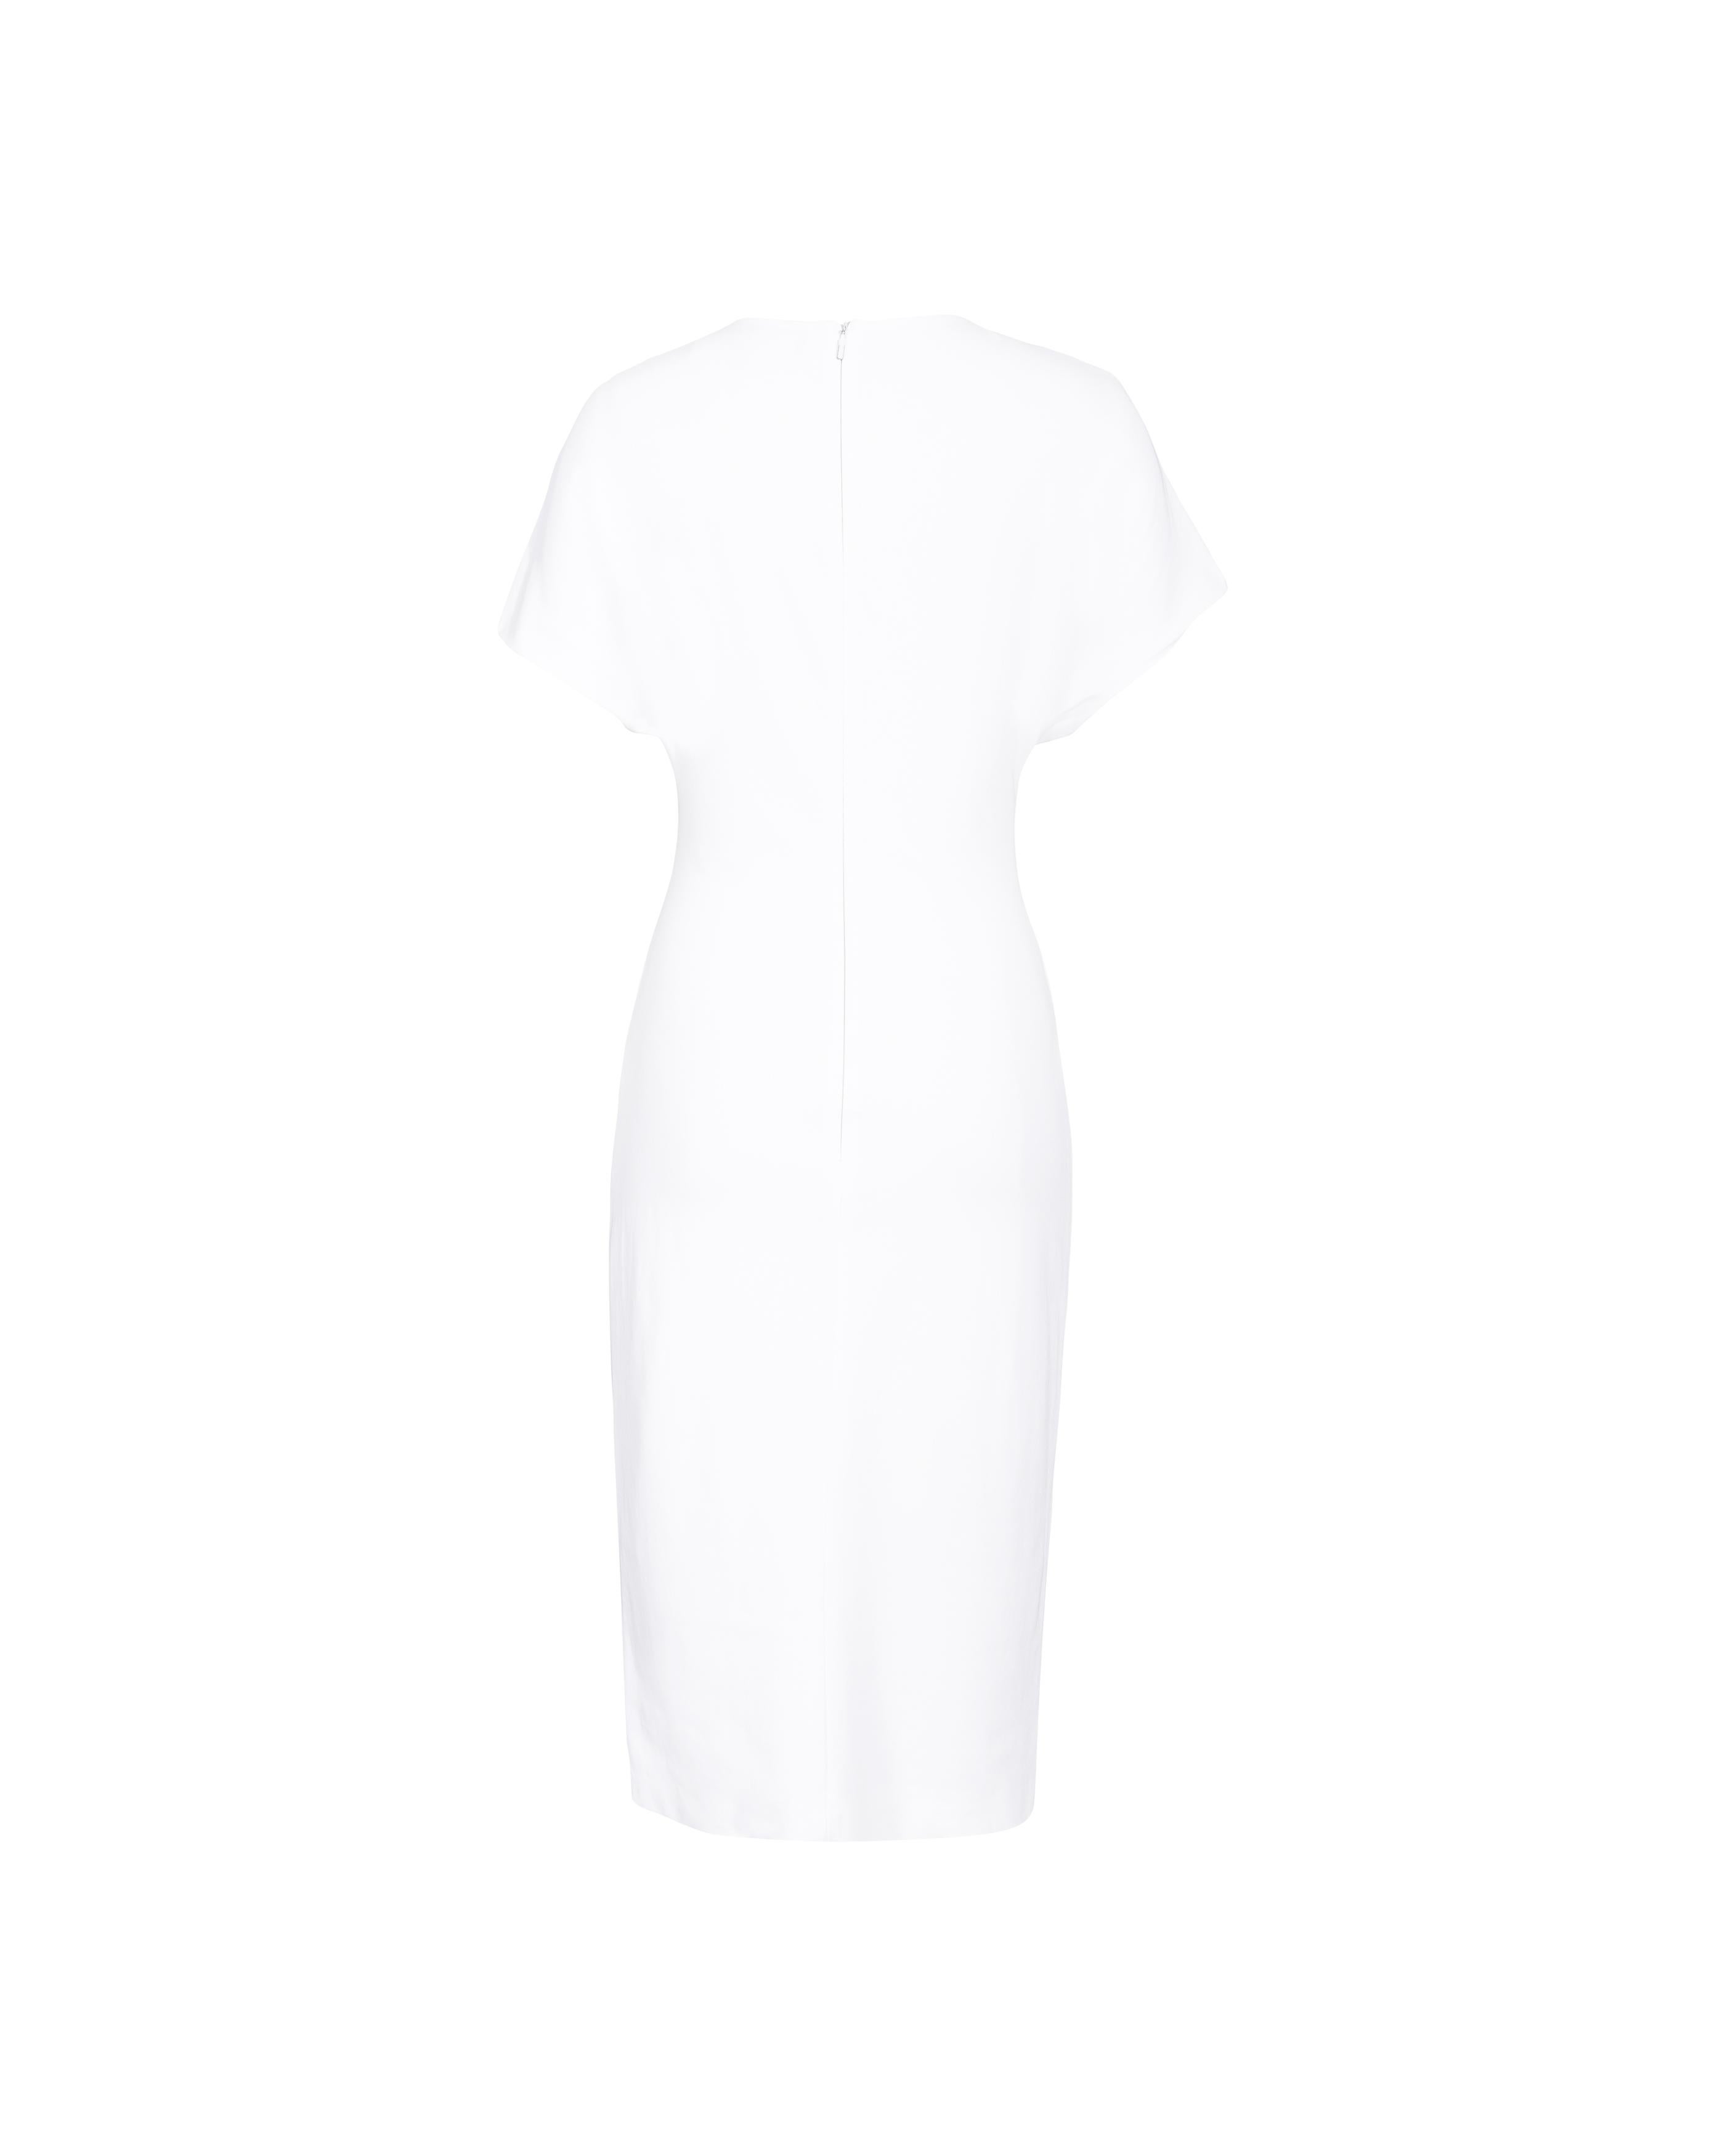 Women's A/W 1996 Gucci by Tom Ford White Cap Sleeve Knee-Length Jersey Dress